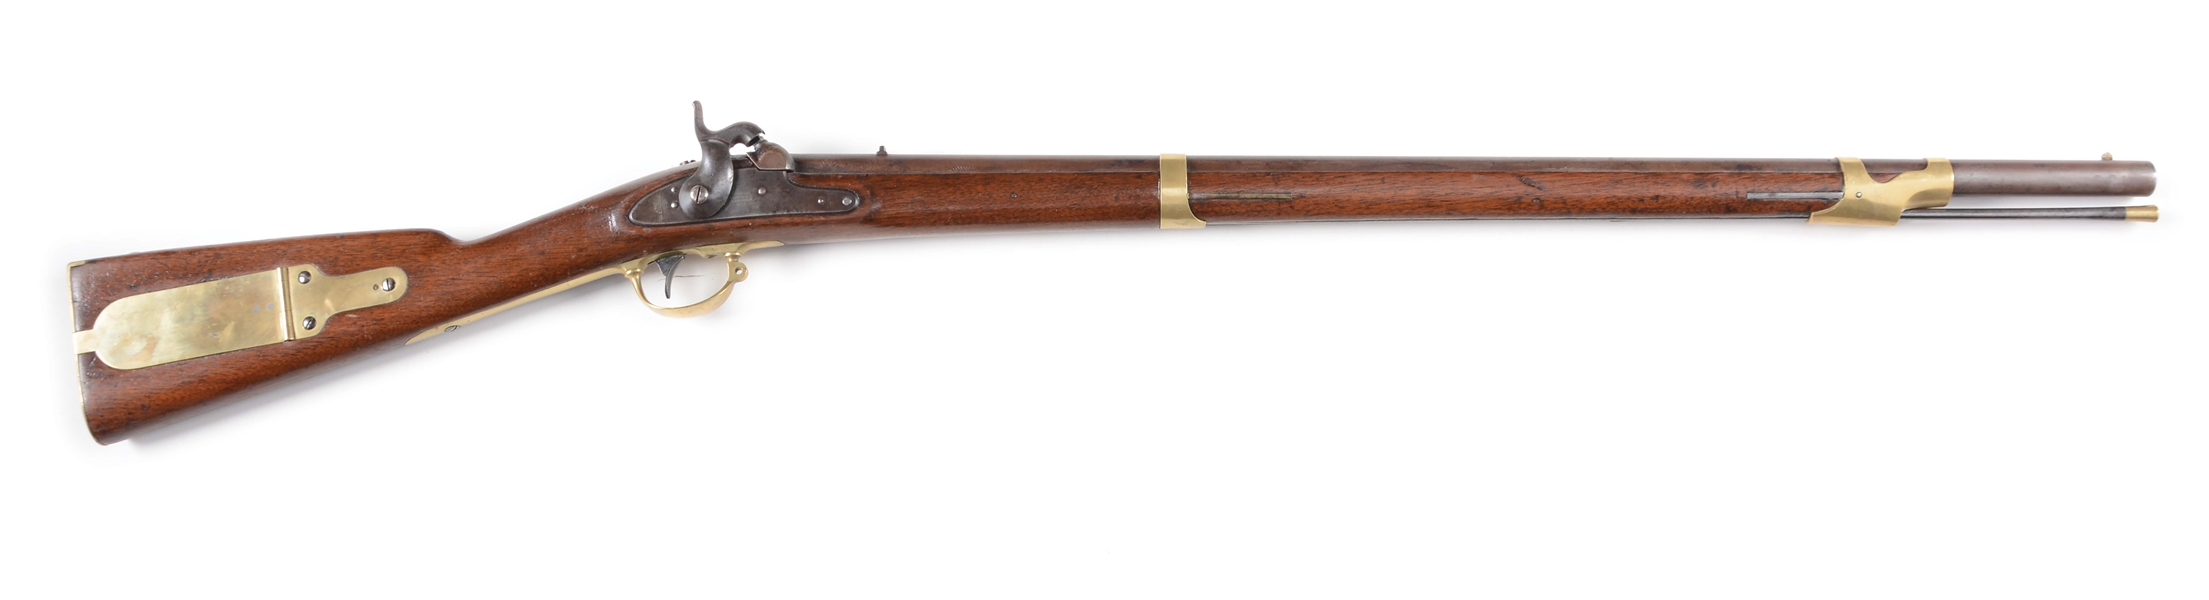 (A) ROBBINS, KENDALL & LAWRENCE CONTRACT MODEL 1841 PERCUSSION RIFLE.